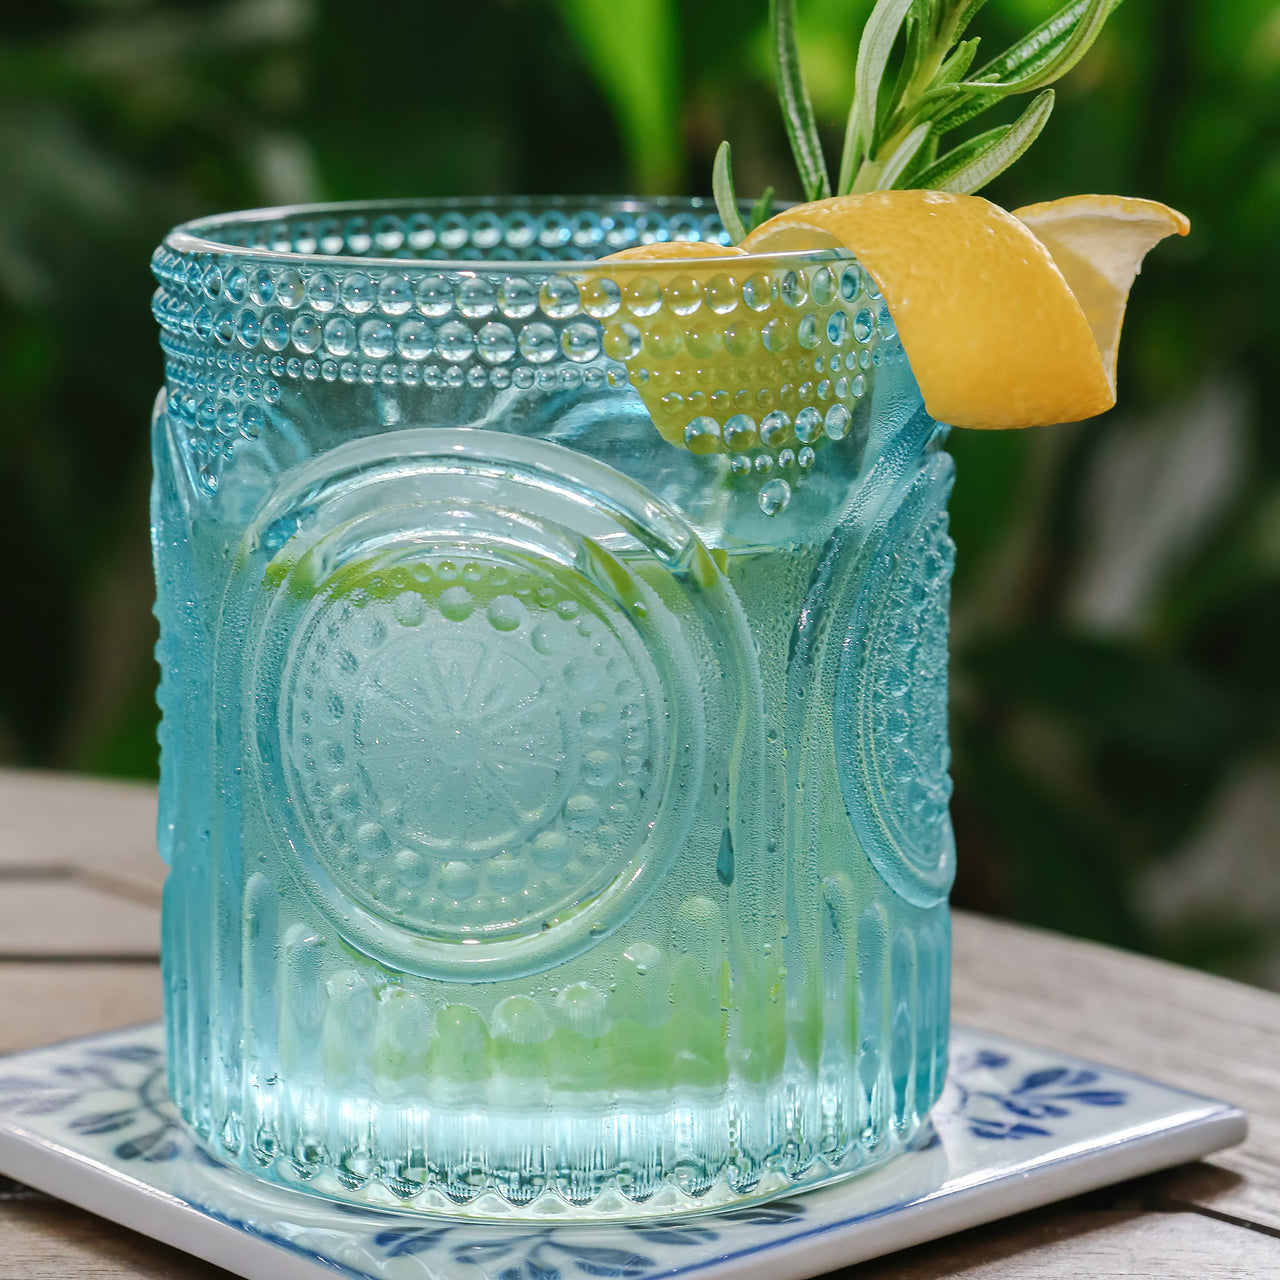 Green Water Glasses - Set of 6